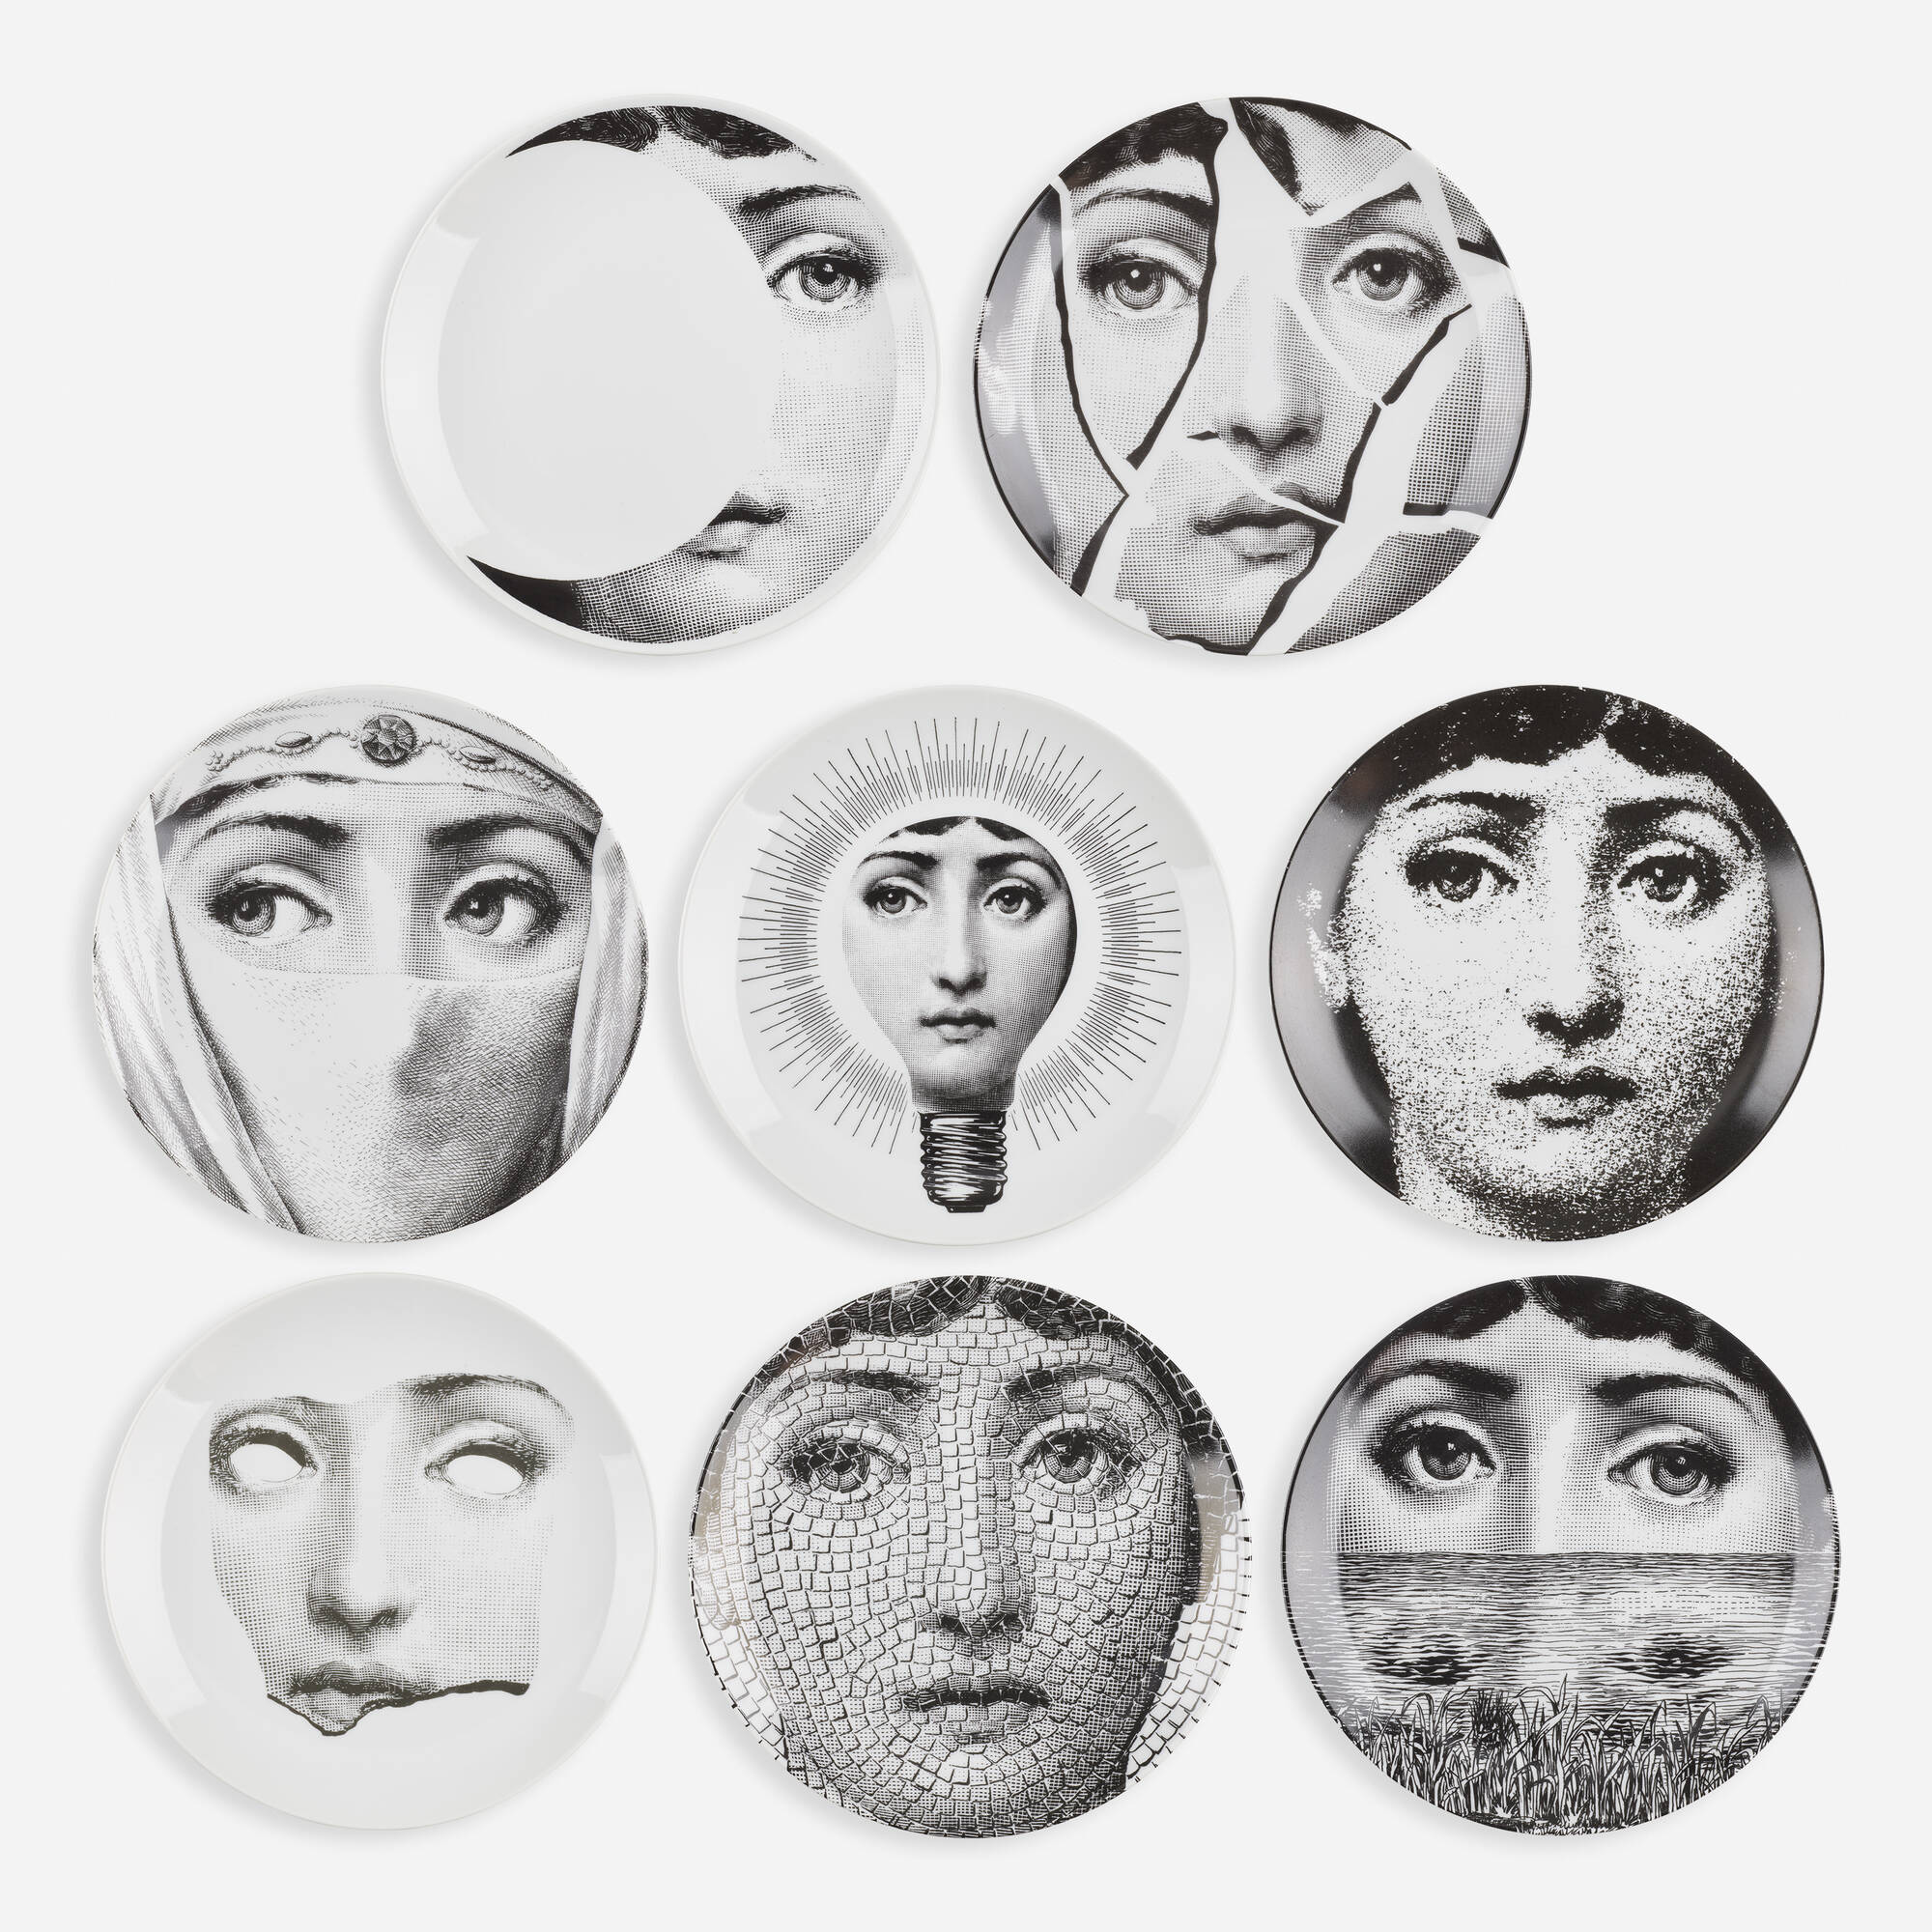 137: PIERO FORNASETTI, Collection of eight Tema e Variazioni plates <  Living Contemporary, 7 October 2021 < Auctions